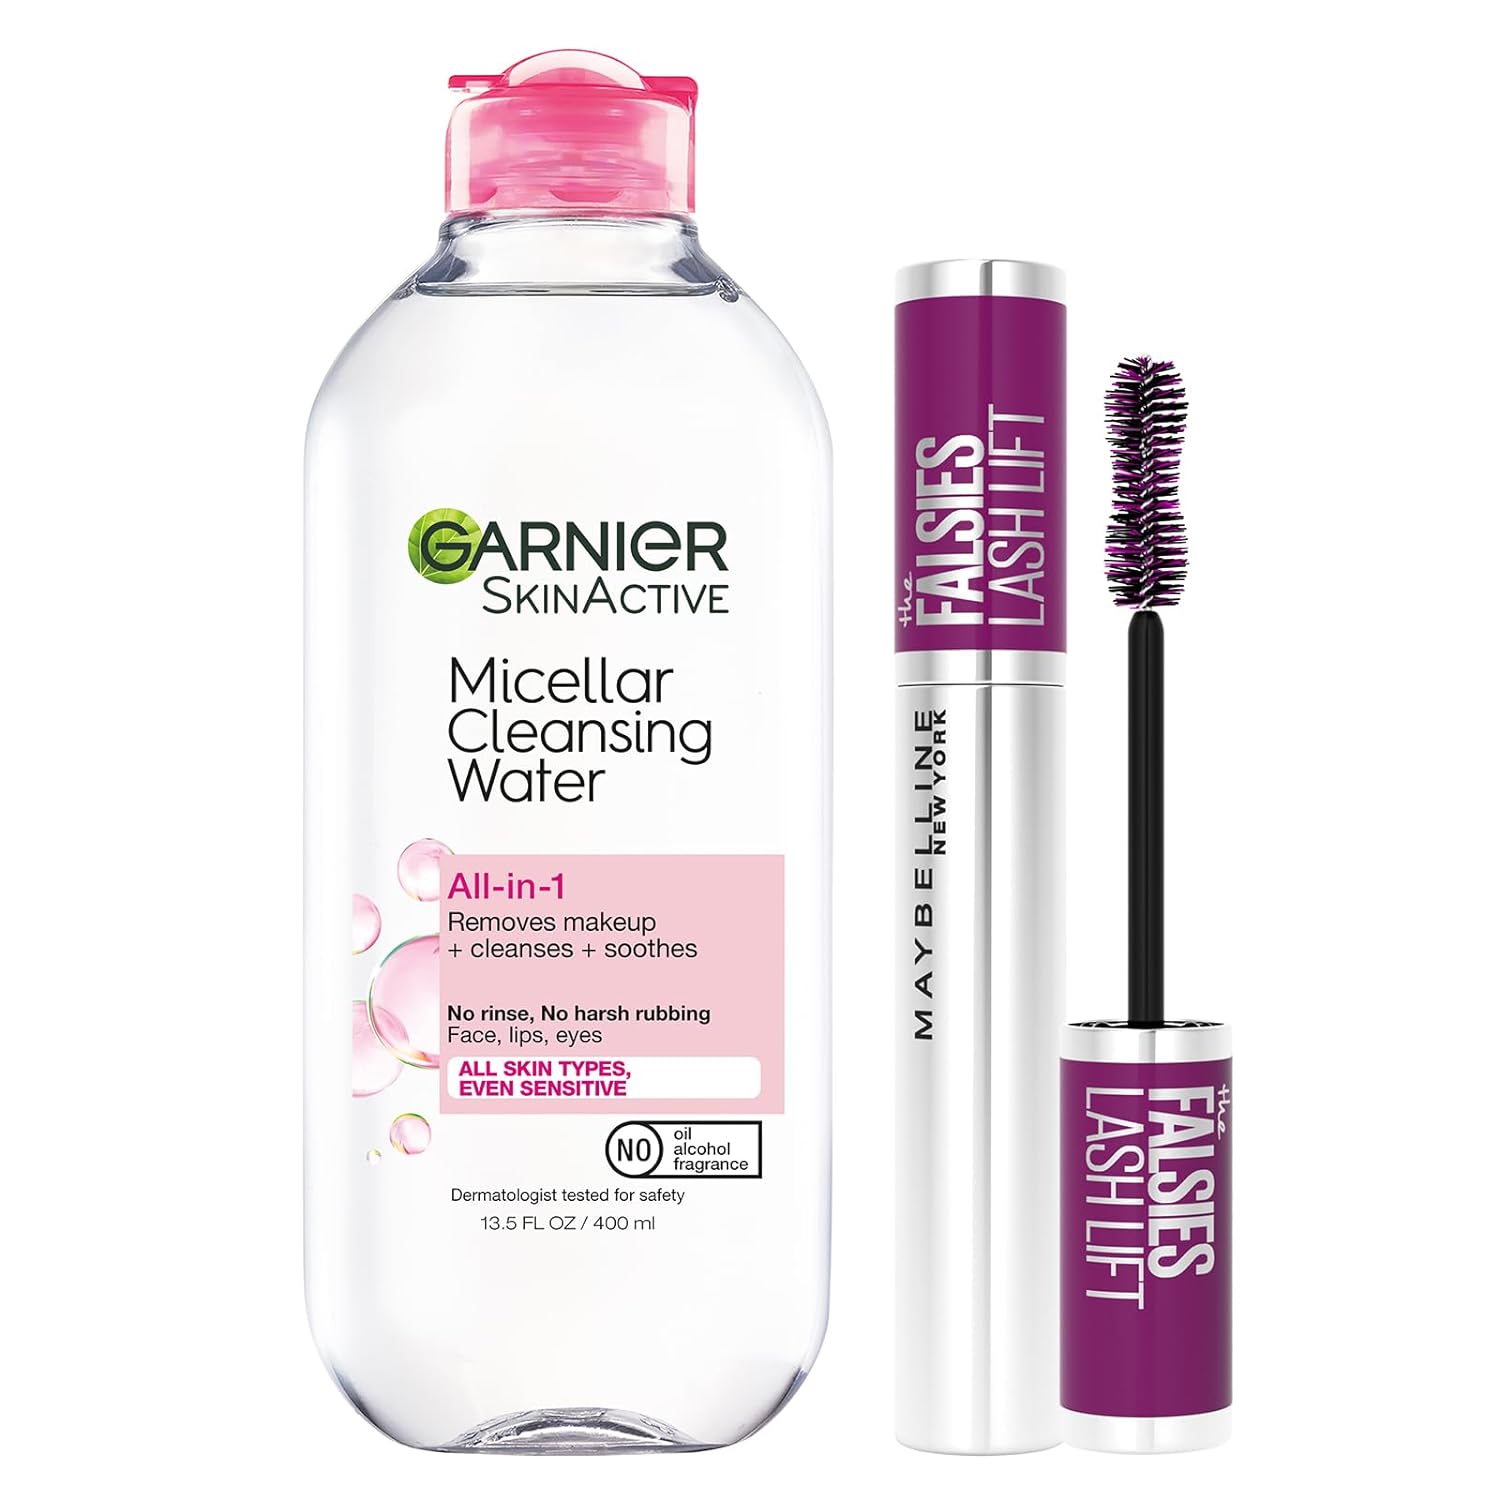 Maybelline The Falsies Lash Lift Washable Mascara + Garnier SkinActive Micellar Water Bundle, Includes 1 Mascara in Very Black and 1 Makeup Remover